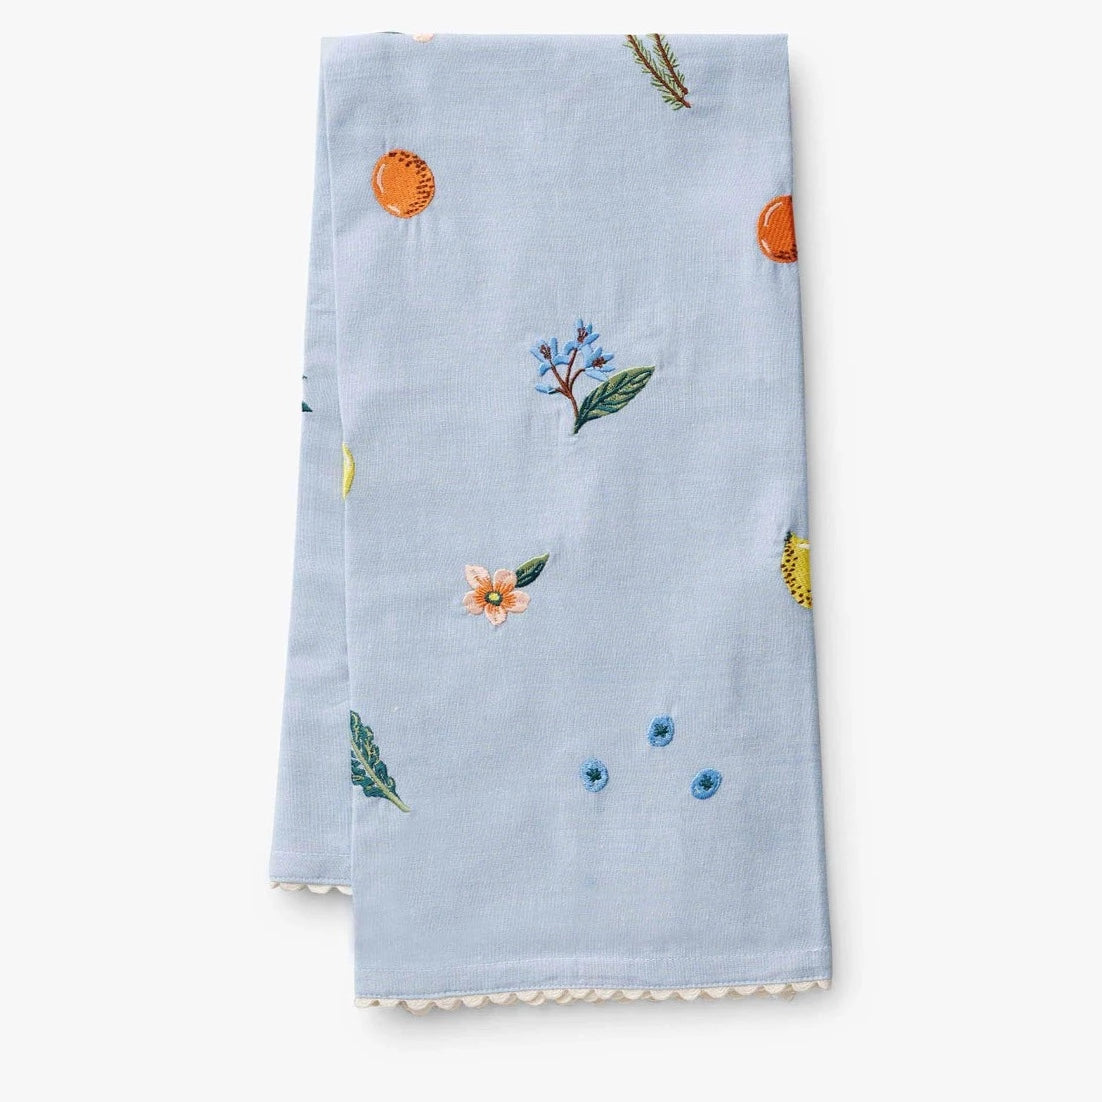 Folded blue towel with embroidered fruits and florals